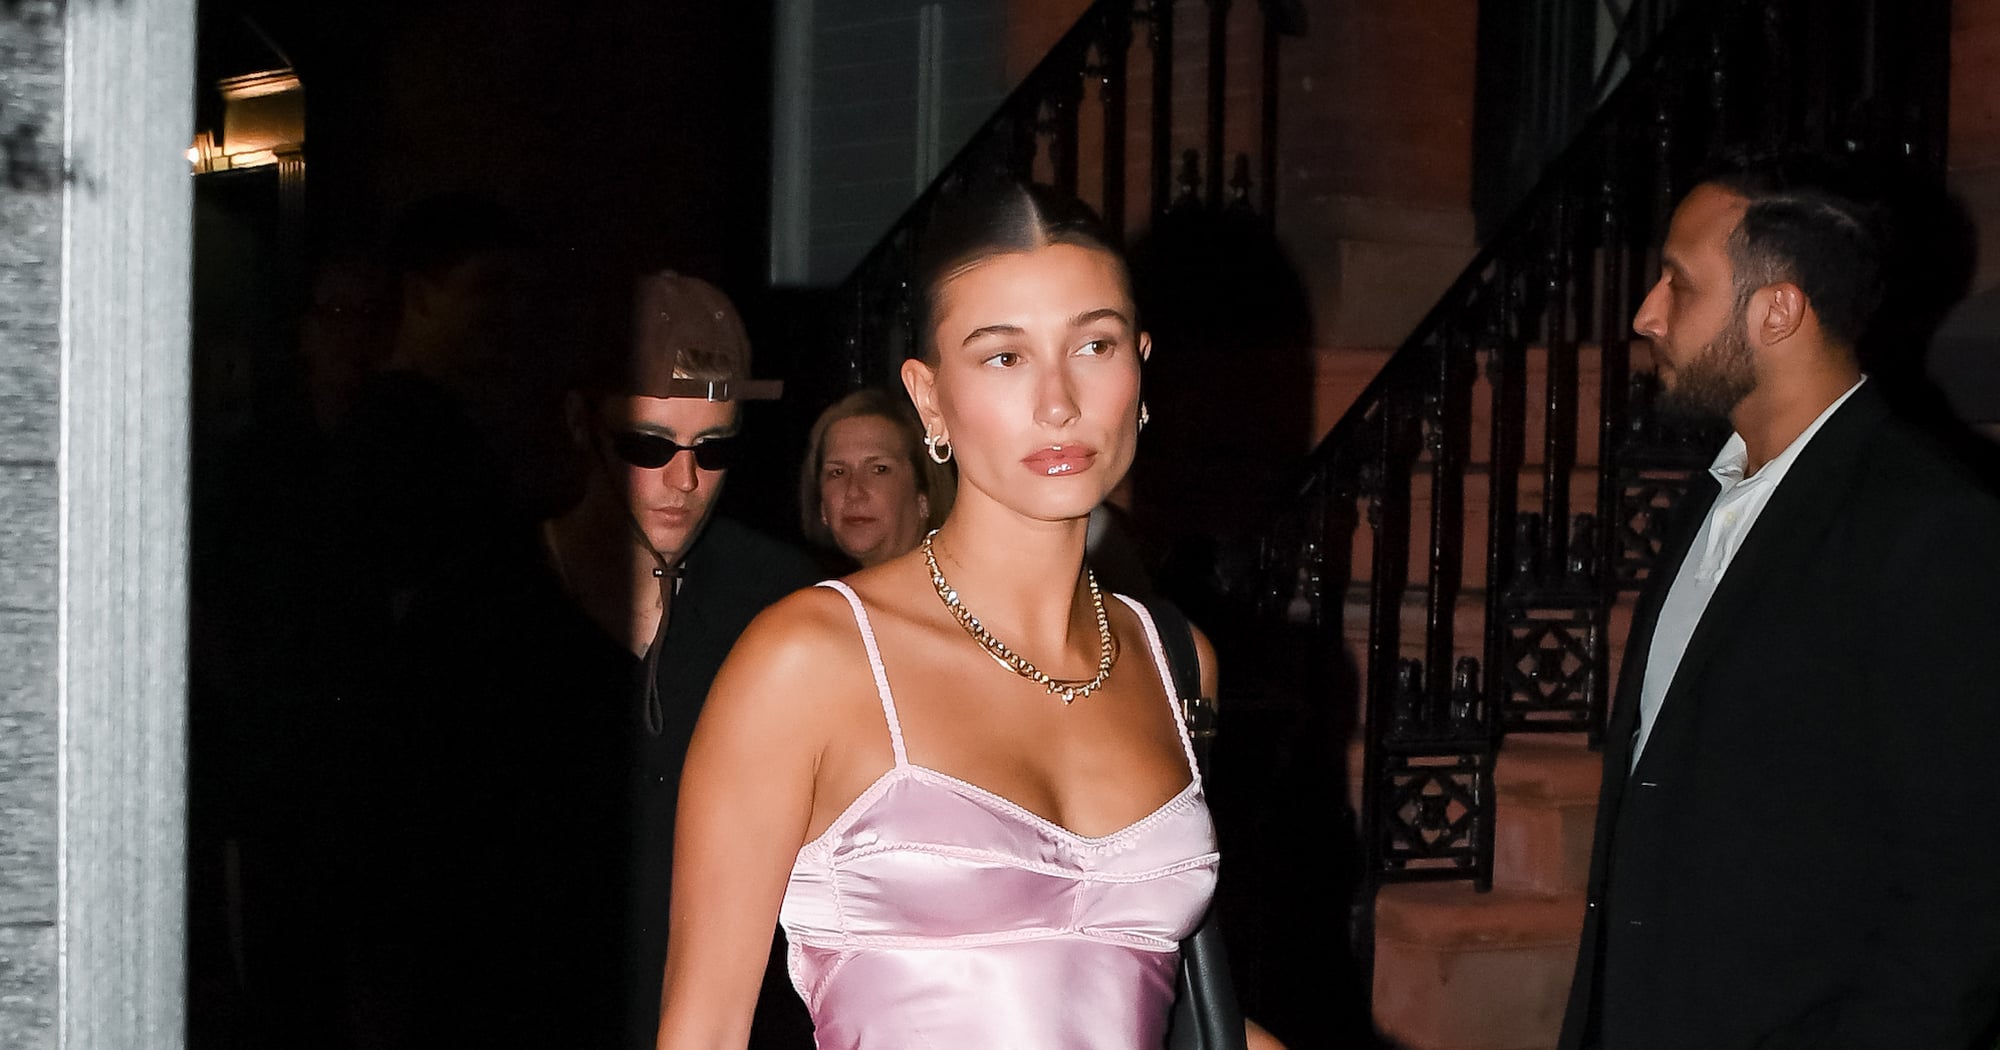 Summer’s “Strawberry Girl” Makeup Is Hailey Bieber Approved